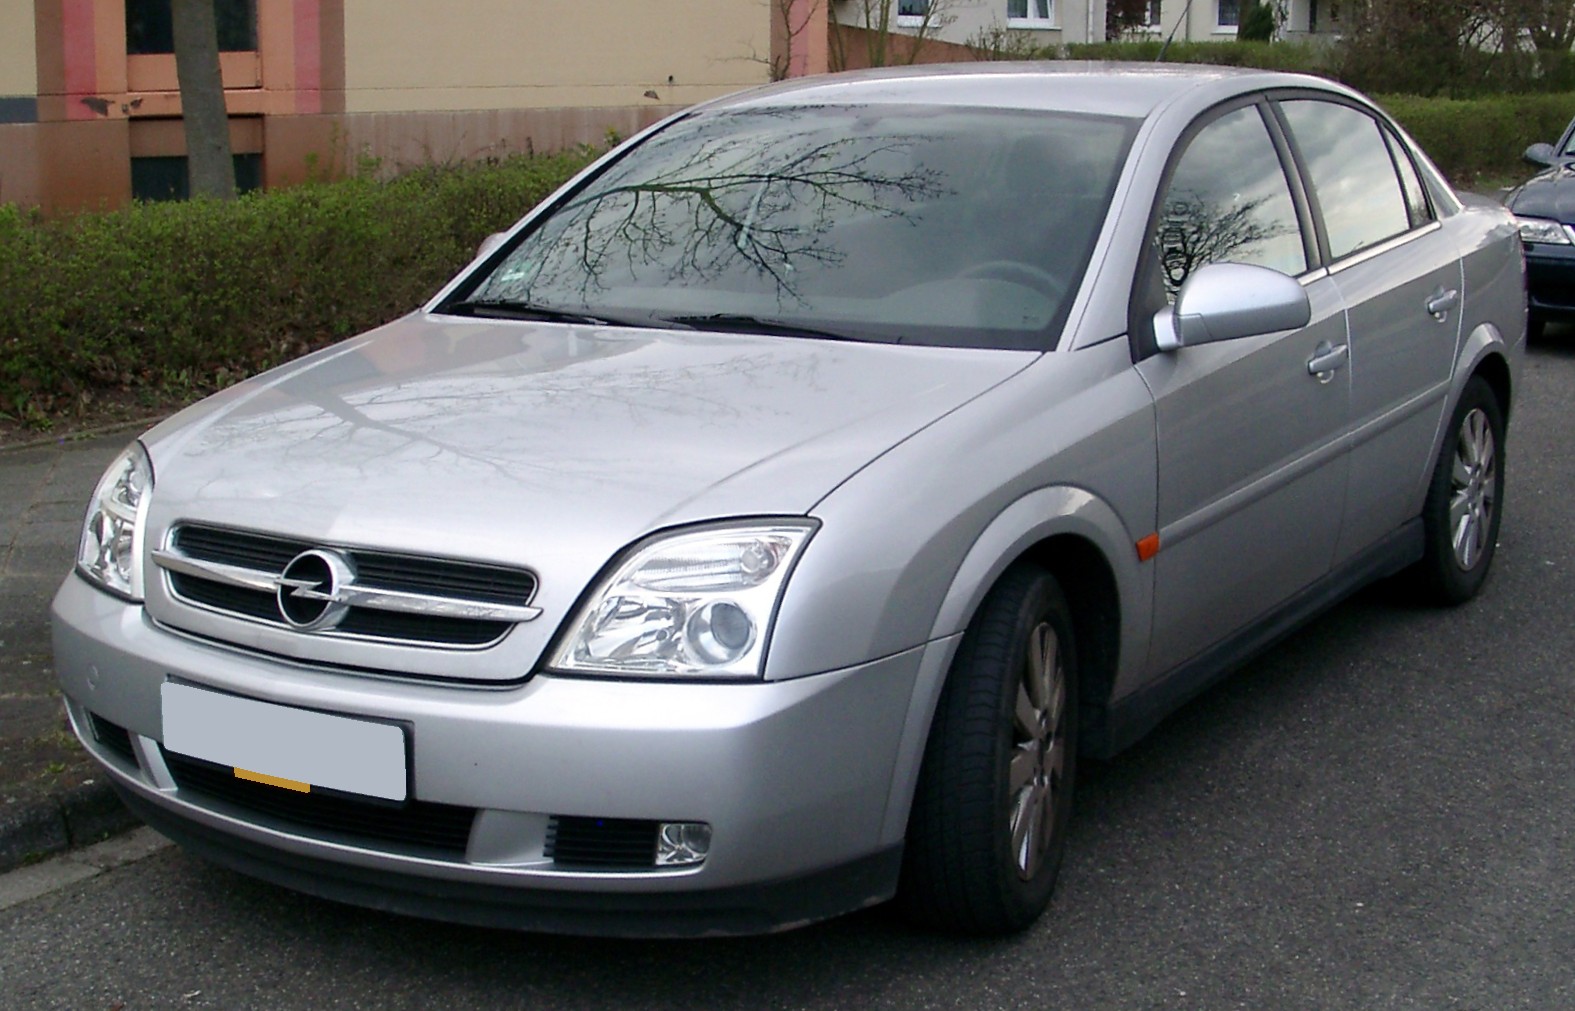 Opel Vectra GL 16S. View Download Wallpaper. 1575x1011. Comments